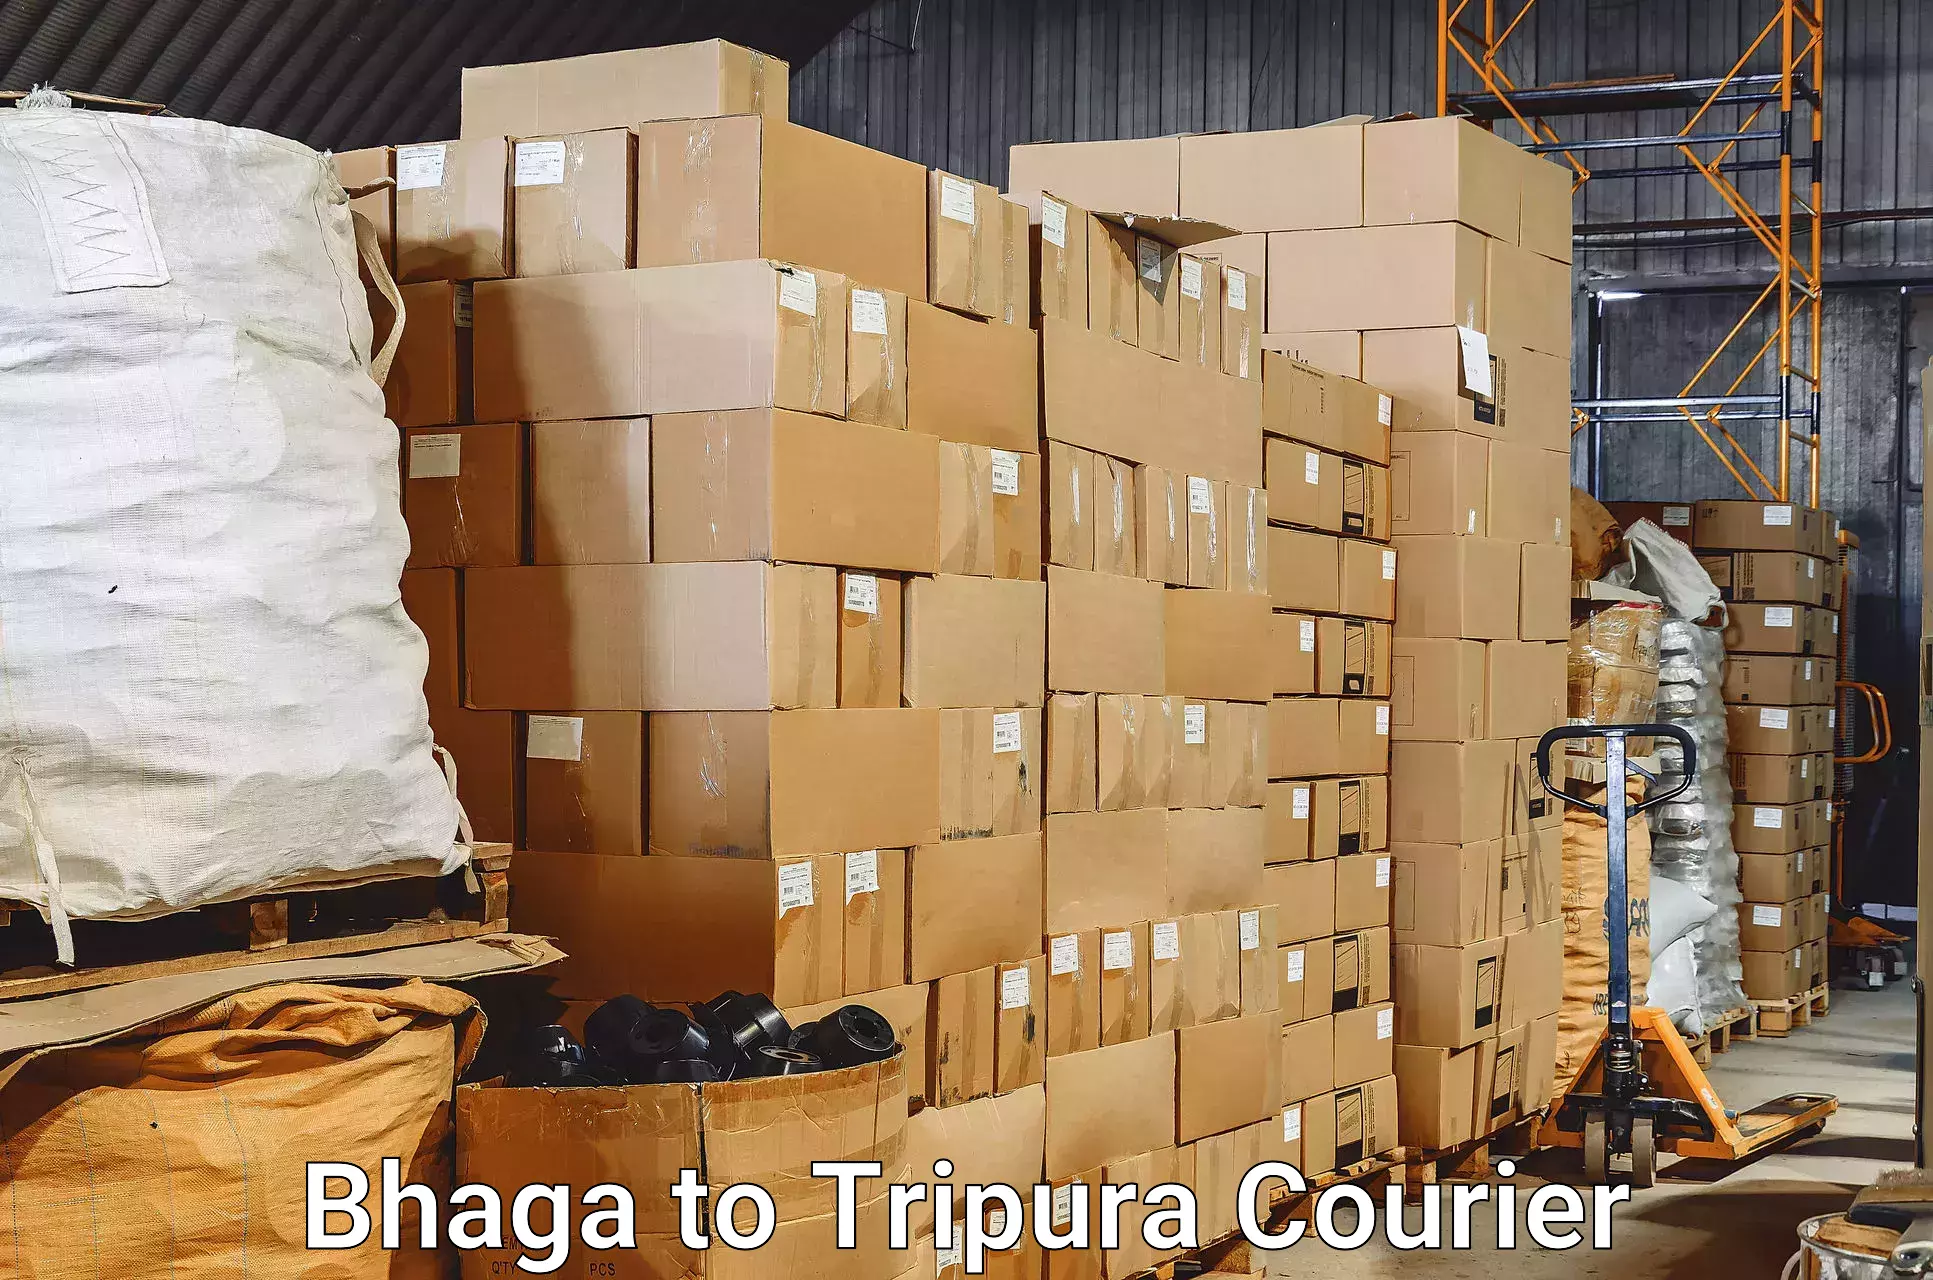 Baggage transport cost in Bhaga to Udaipur Tripura